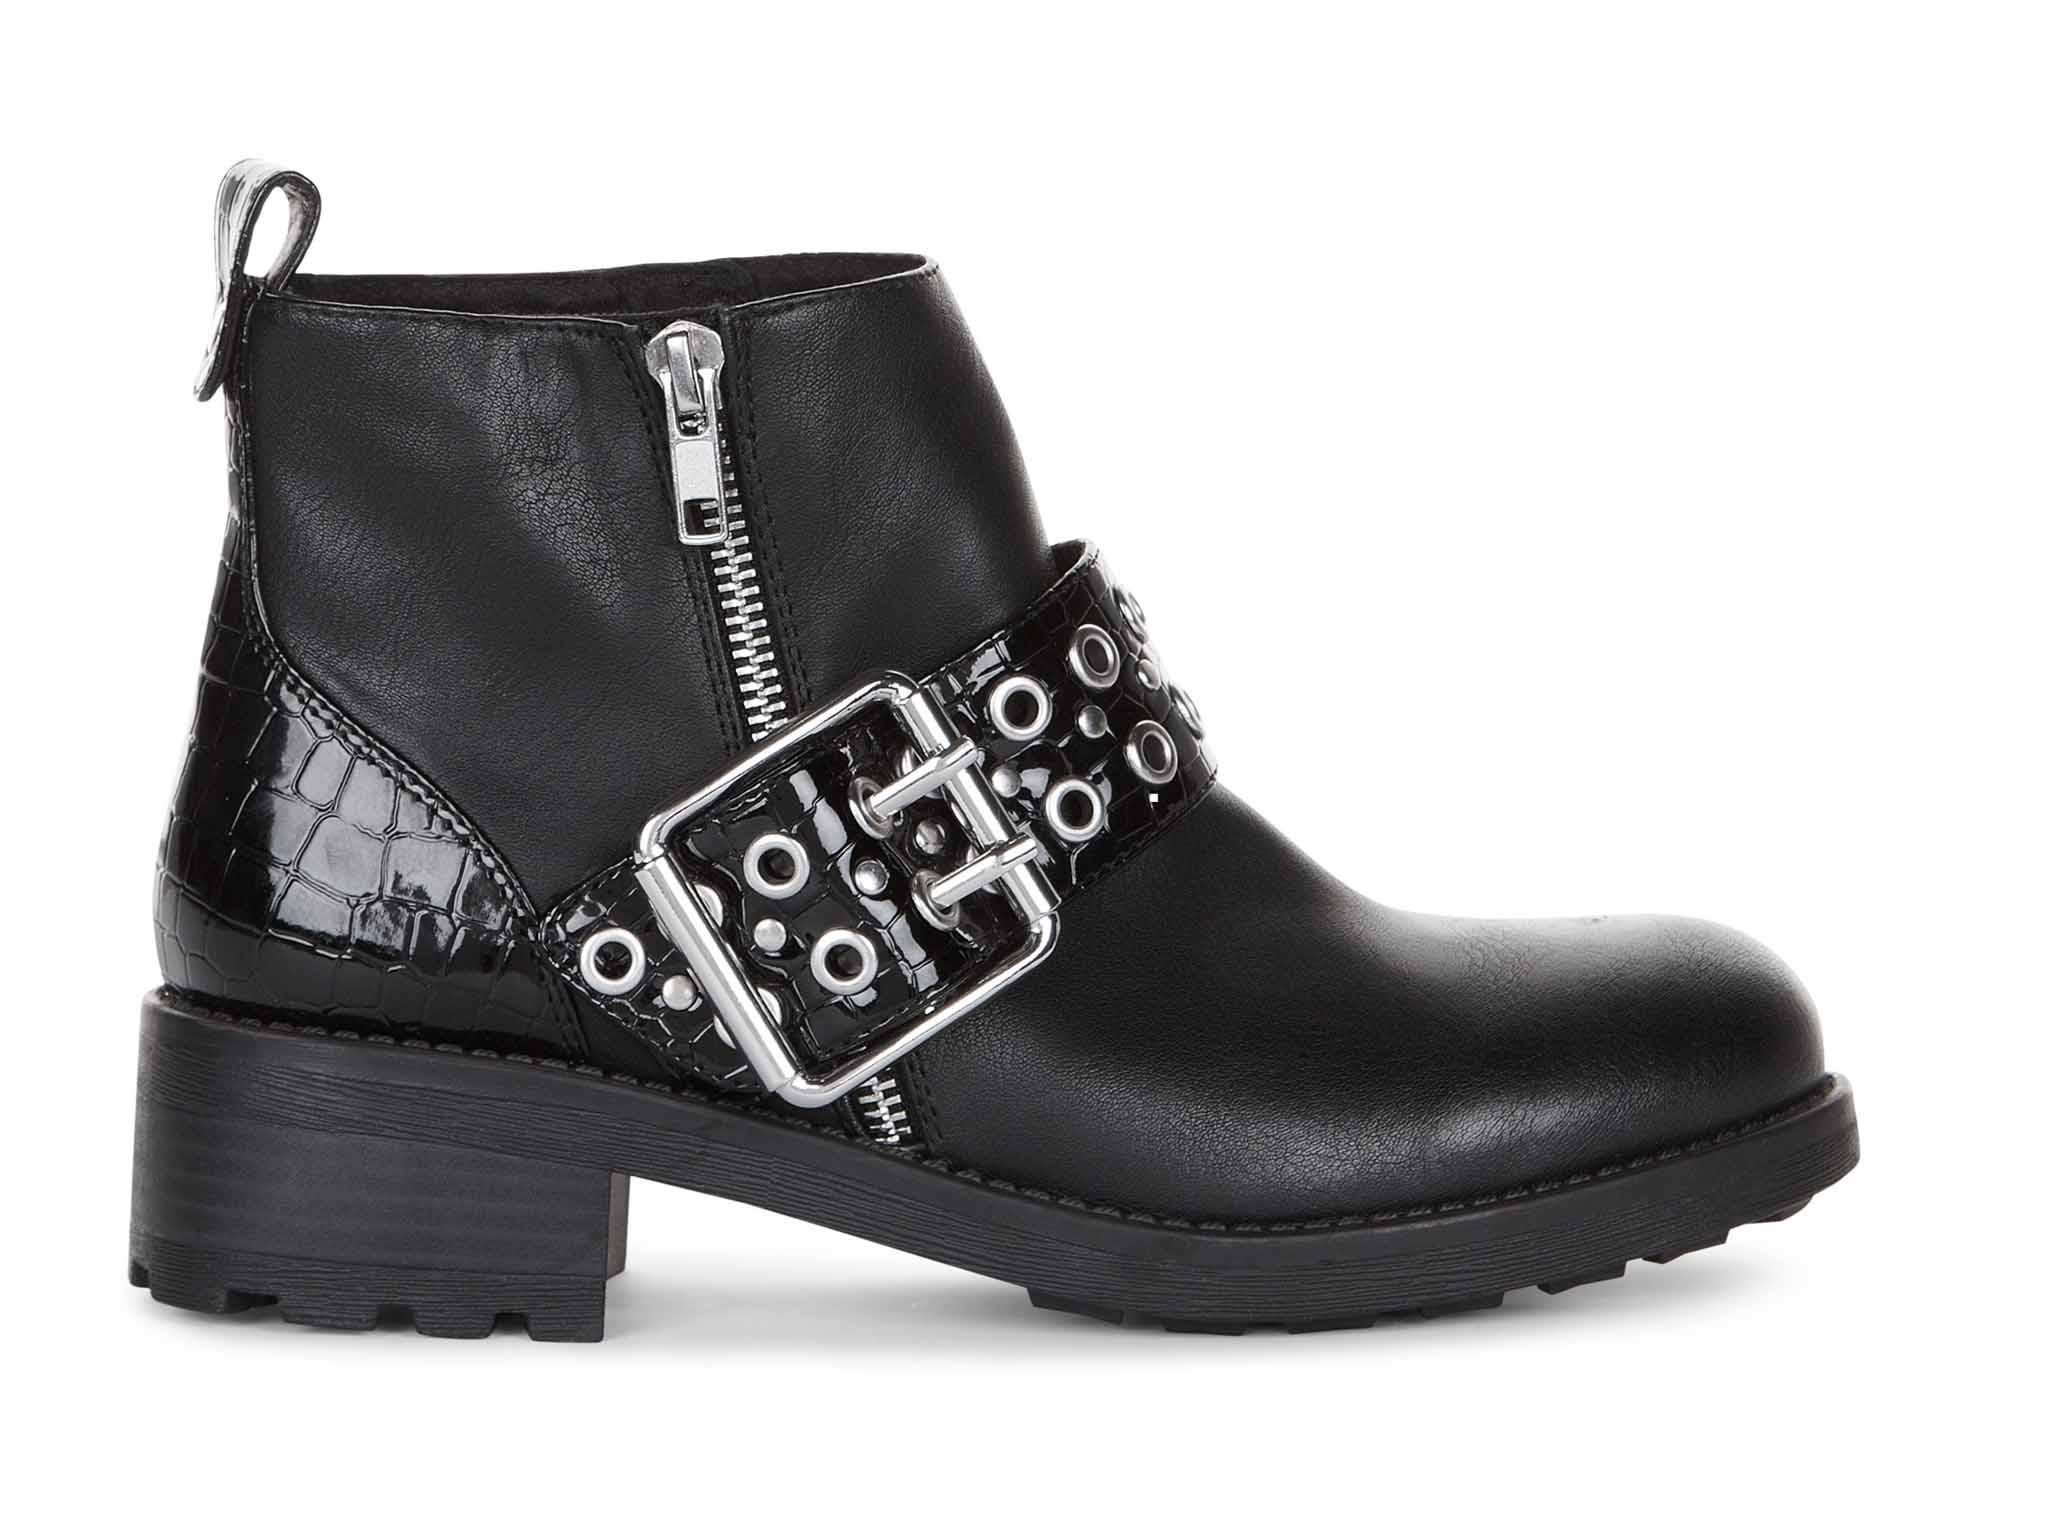 New Look Black Leather Chunky Buckle Boot £29.99 newlook.com